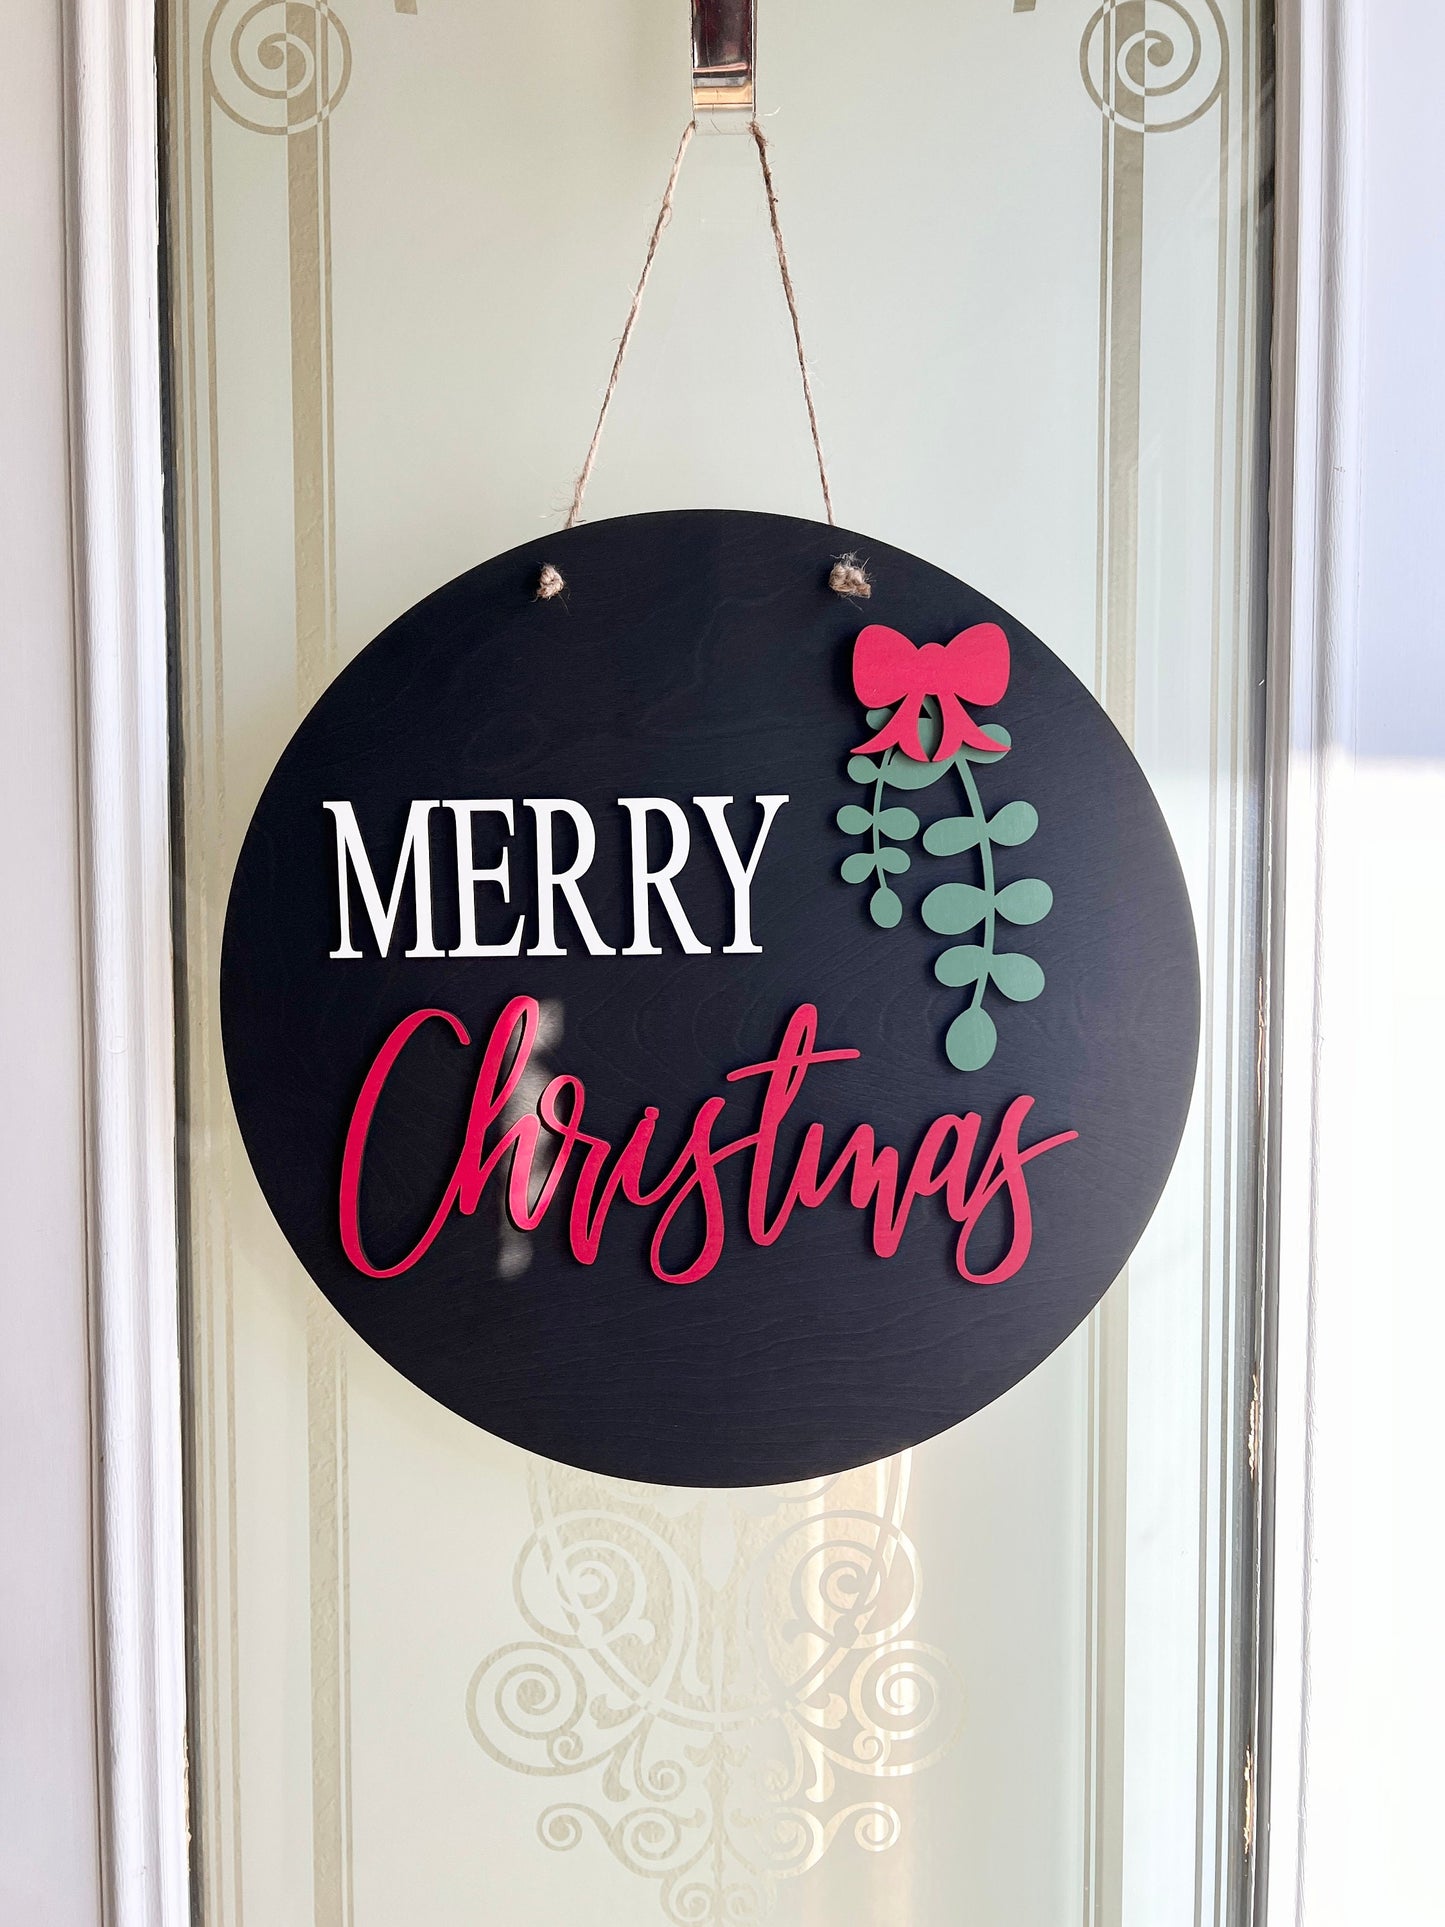 Merry Christmas sign, Christmas decorations, 3D holiday decor, wood signs, living room wooden sign wall hanging, black mantel decor